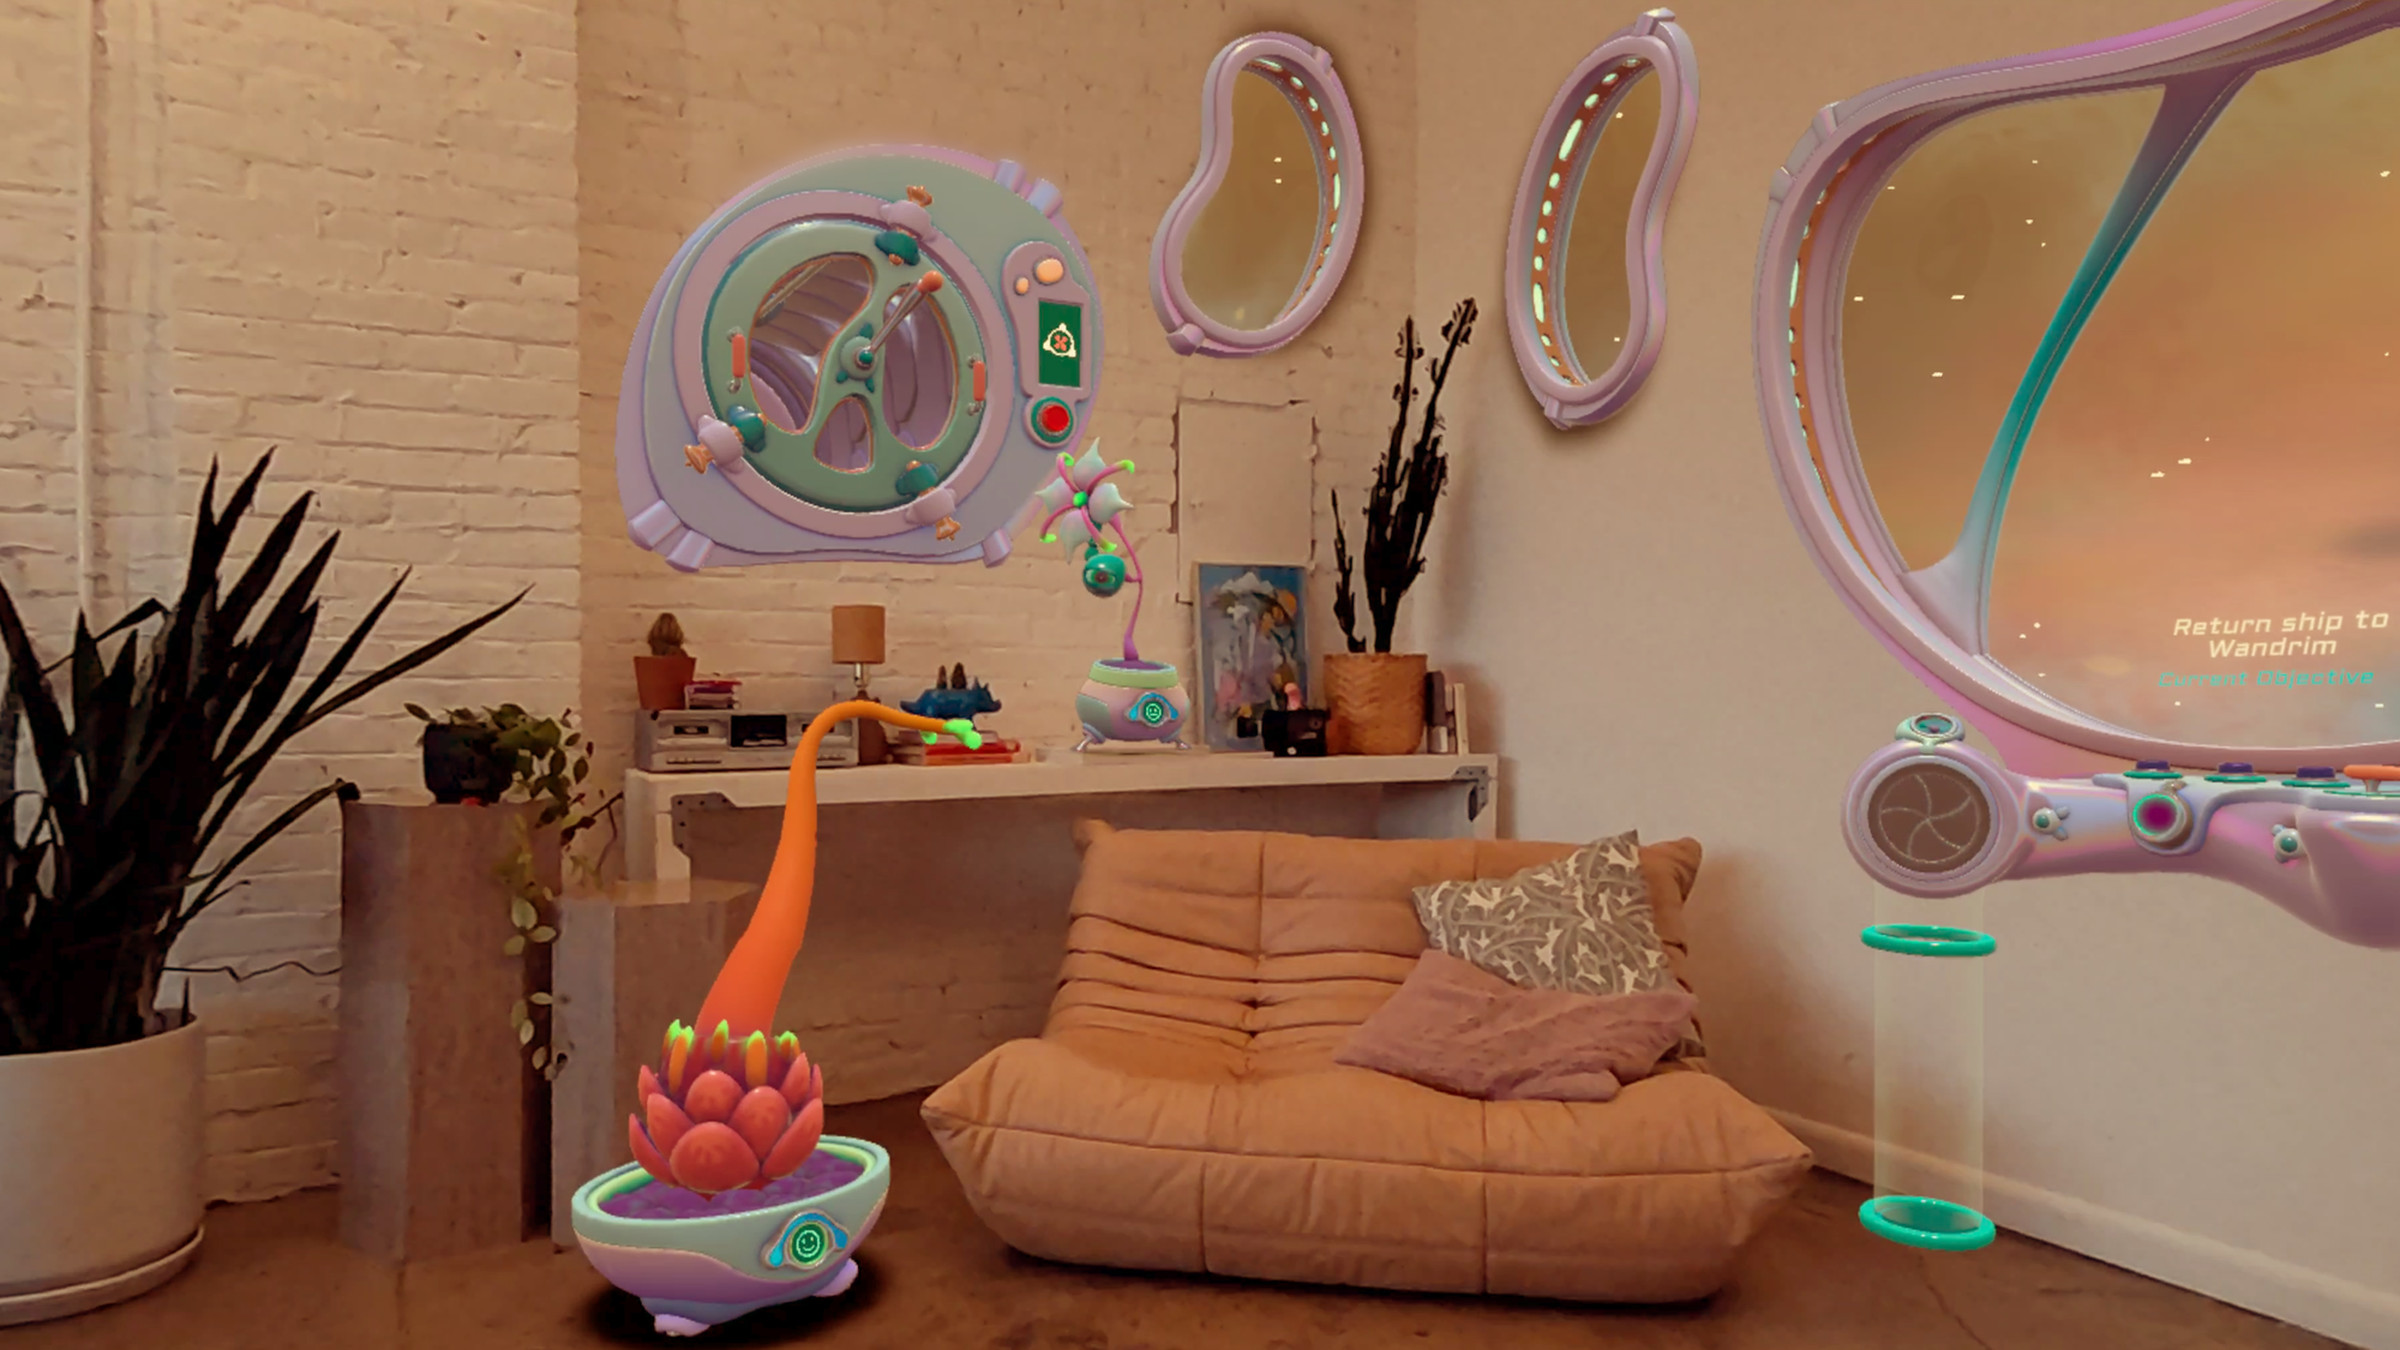 A screenshot showing passthrough video of a room, but with AR objects like windows on the walls and plants on surfaces.